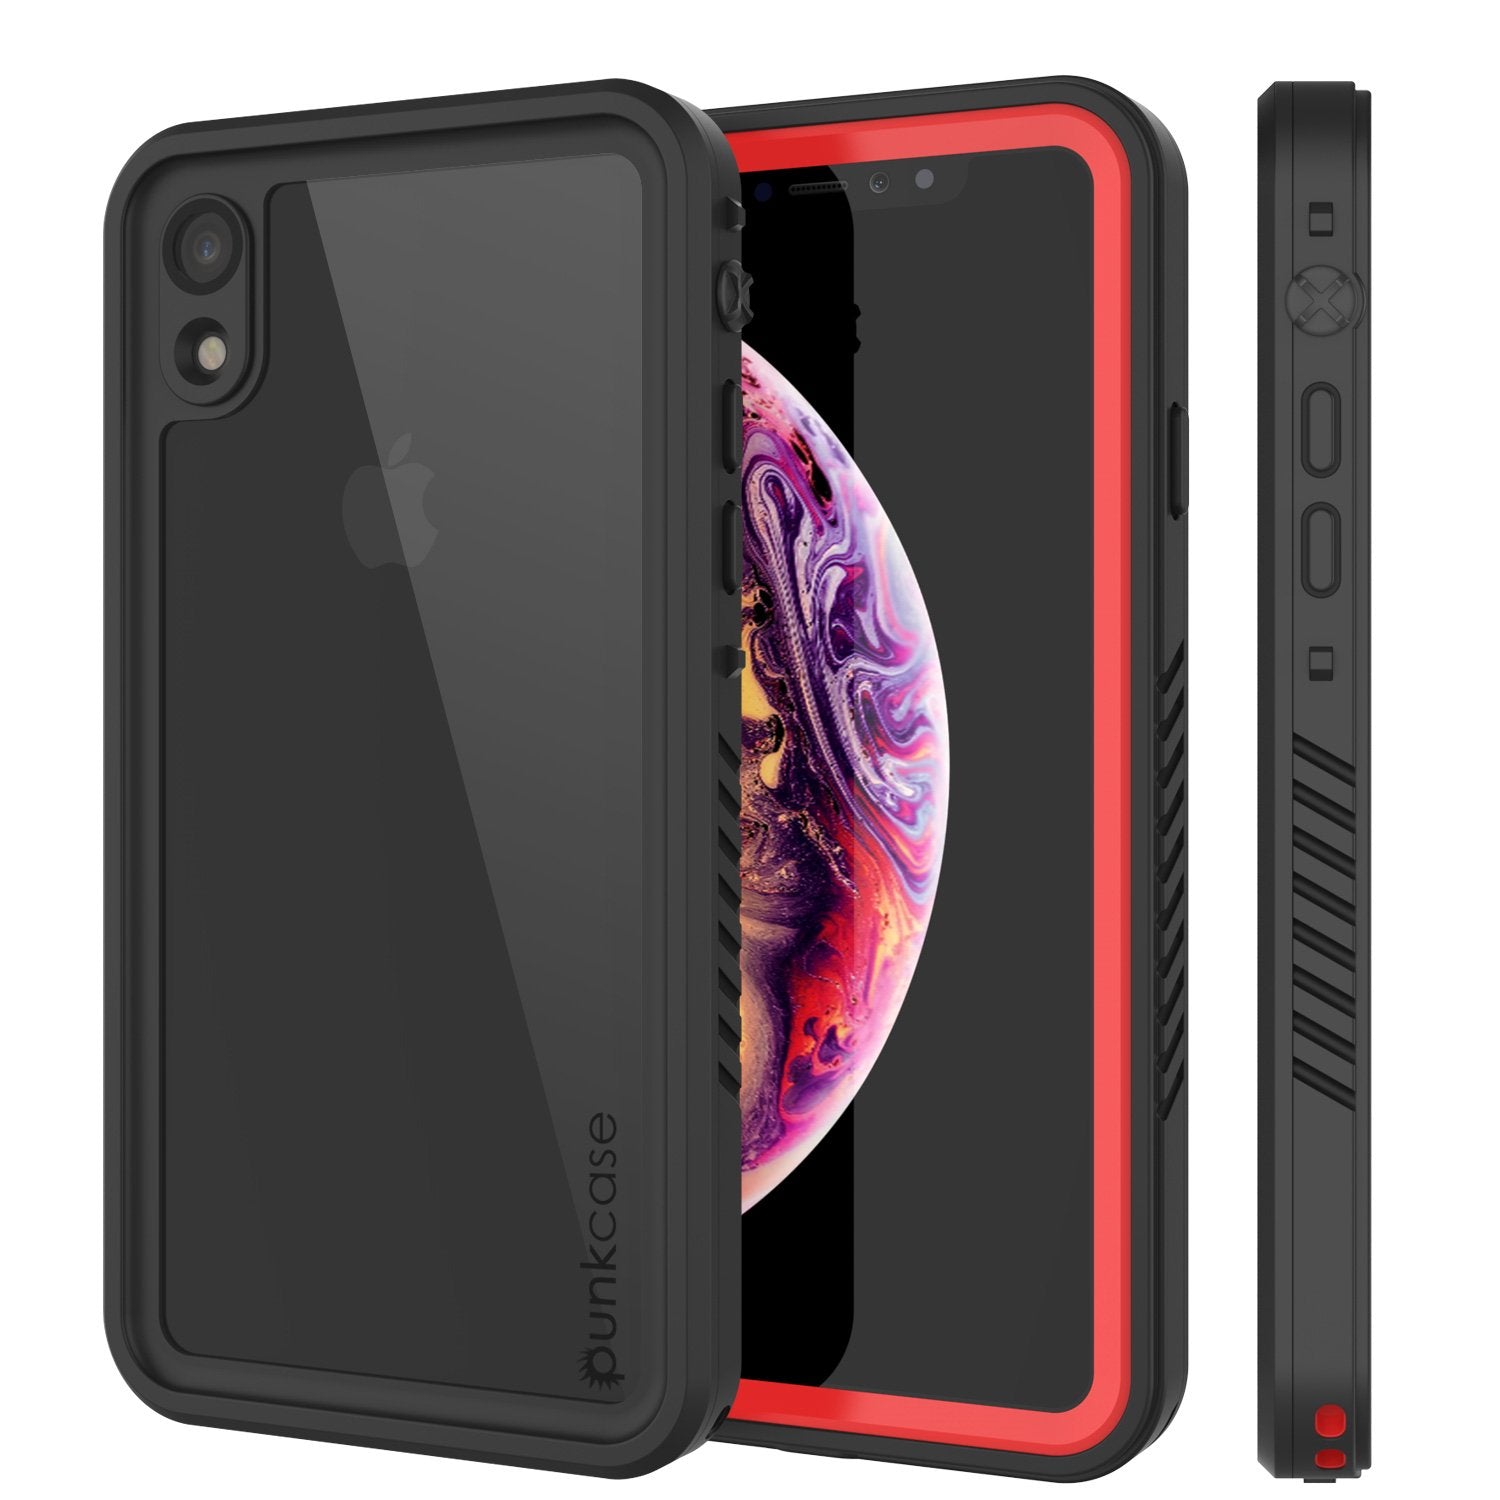 iPhone XR Waterproof Case, Punkcase [Extreme Series] Armor Cover W/ Built In Screen Protector [Red]